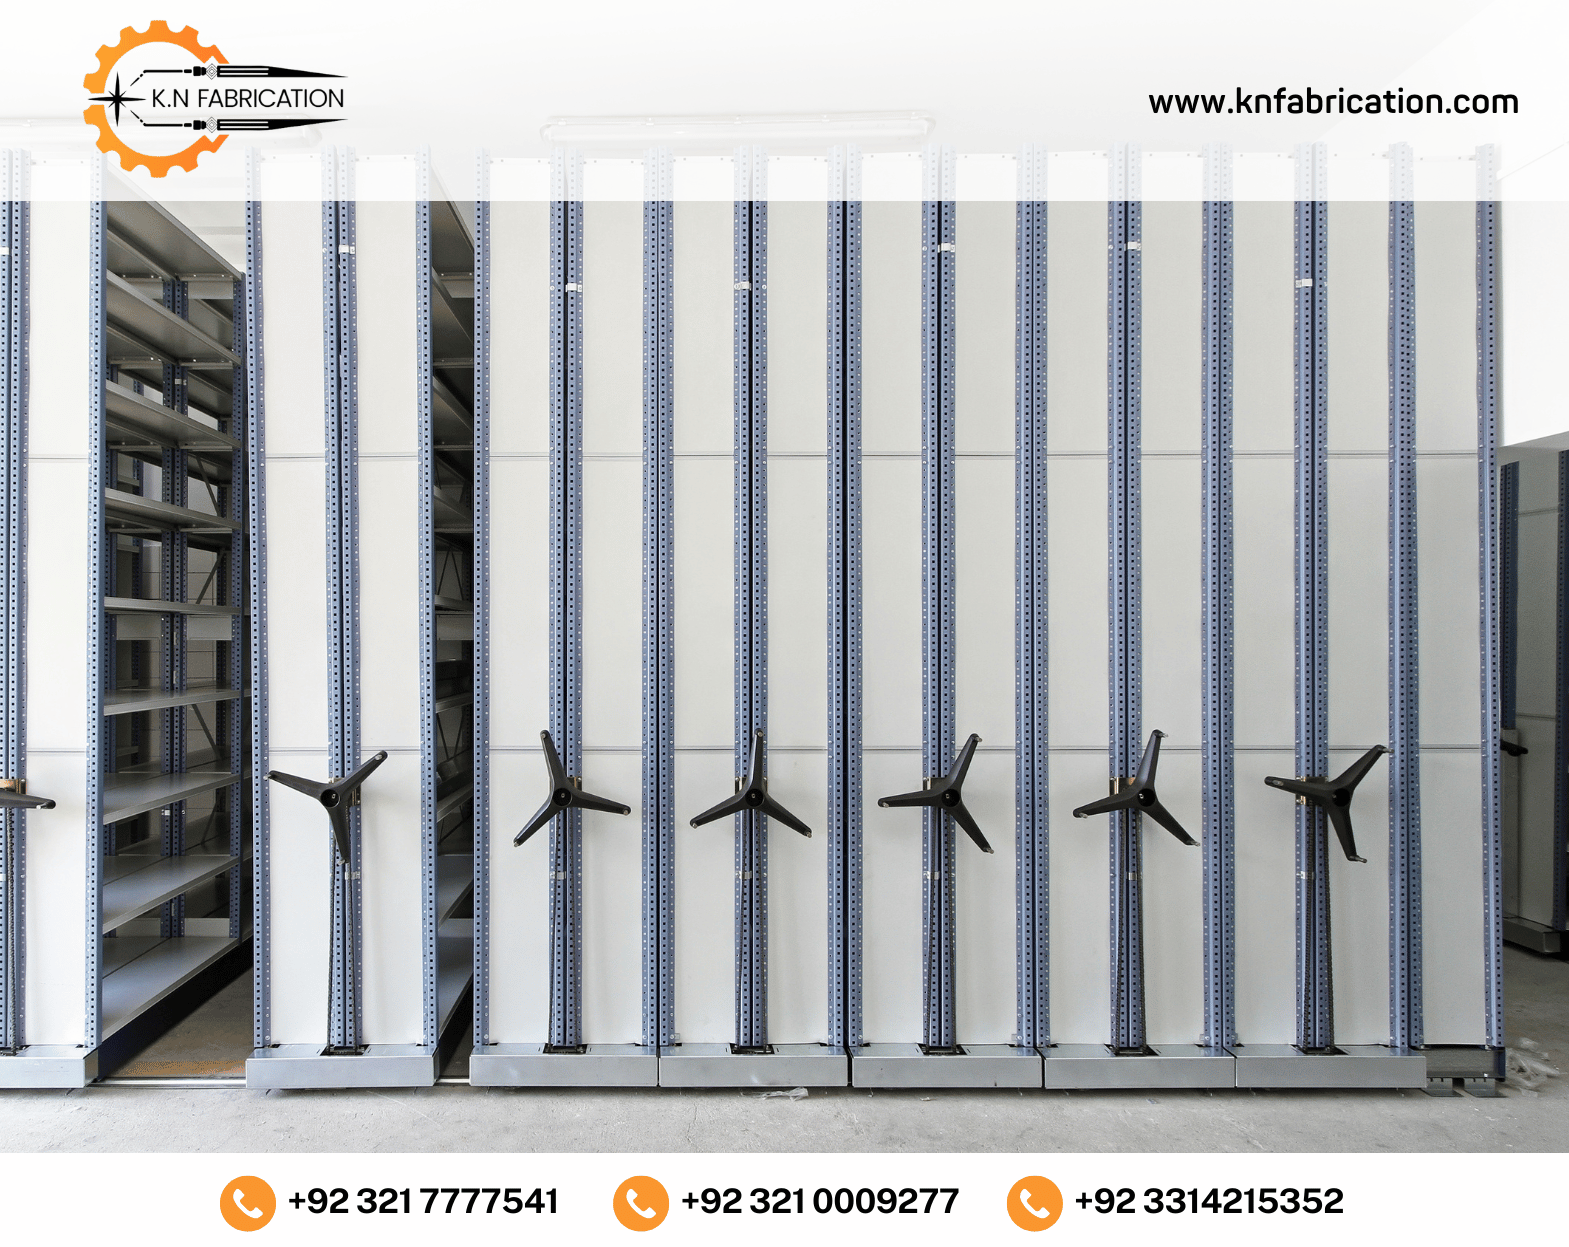 Efficient mobile racking system in Pakistan by K.N Fabrication